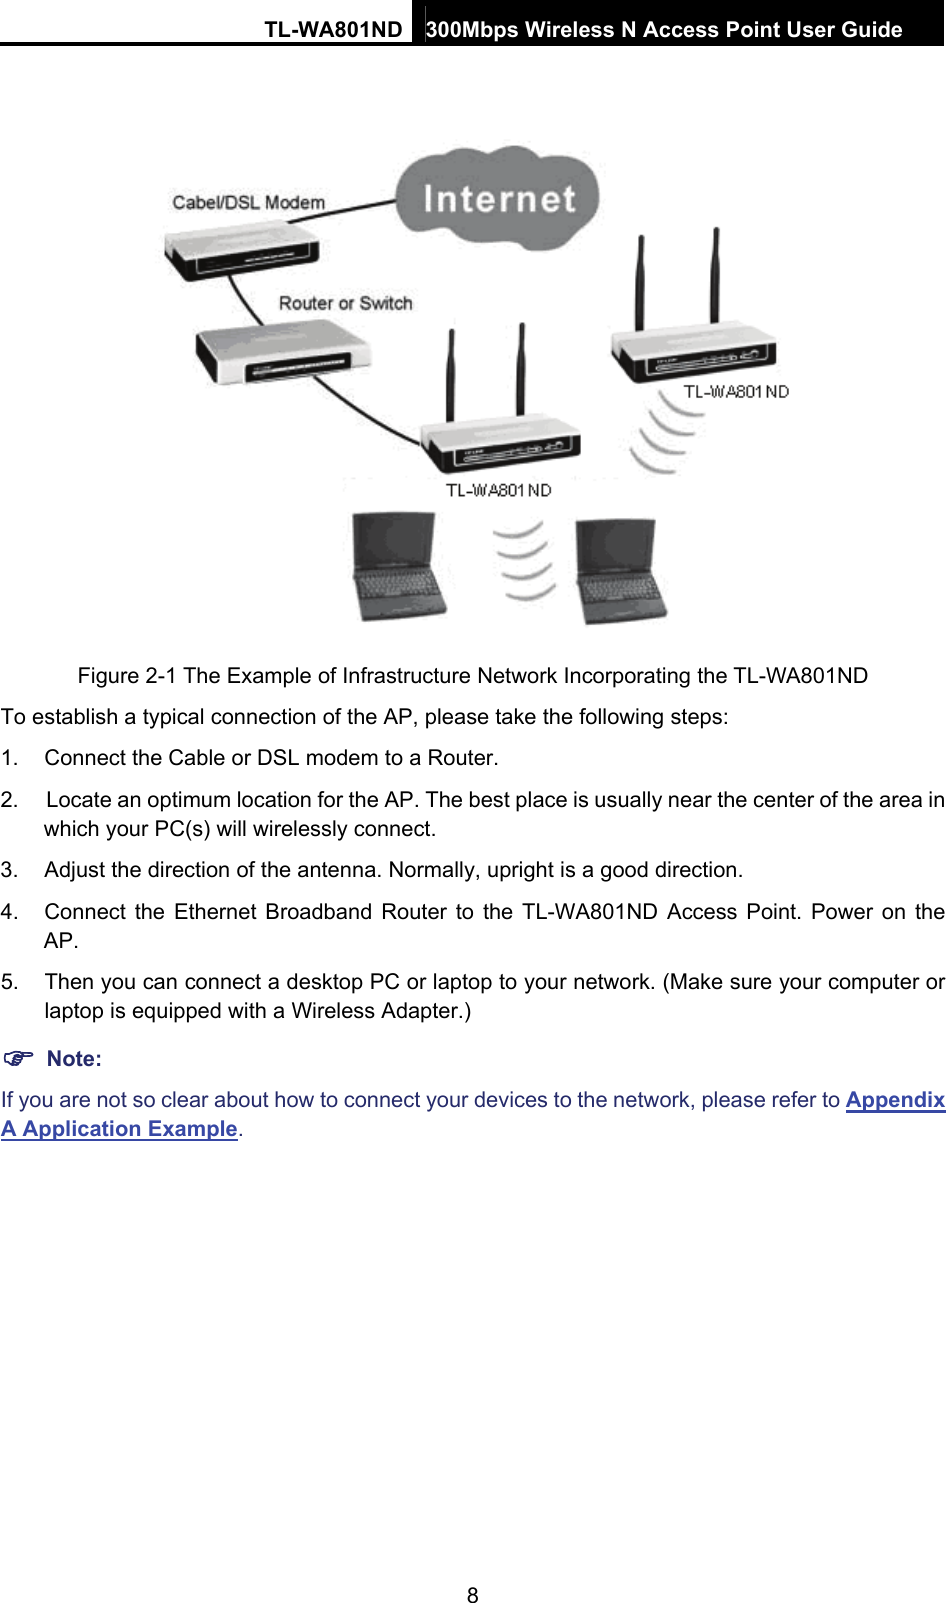 TL-WA801ND 300Mbps Wireless N Access Point User Guide  8  Figure 2-1 The Example of Infrastructure Network Incorporating the TL-WA801ND To establish a typical connection of the AP, please take the following steps: 1.  Connect the Cable or DSL modem to a Router. 2.  Locate an optimum location for the AP. The best place is usually near the center of the area in which your PC(s) will wirelessly connect. 3.  Adjust the direction of the antenna. Normally, upright is a good direction. 4.  Connect the Ethernet Broadband Router to the TL-WA801ND Access Point. Power on the AP. 5.  Then you can connect a desktop PC or laptop to your network. (Make sure your computer or laptop is equipped with a Wireless Adapter.) ) Note: If you are not so clear about how to connect your devices to the network, please refer to Appendix A Application Example.  